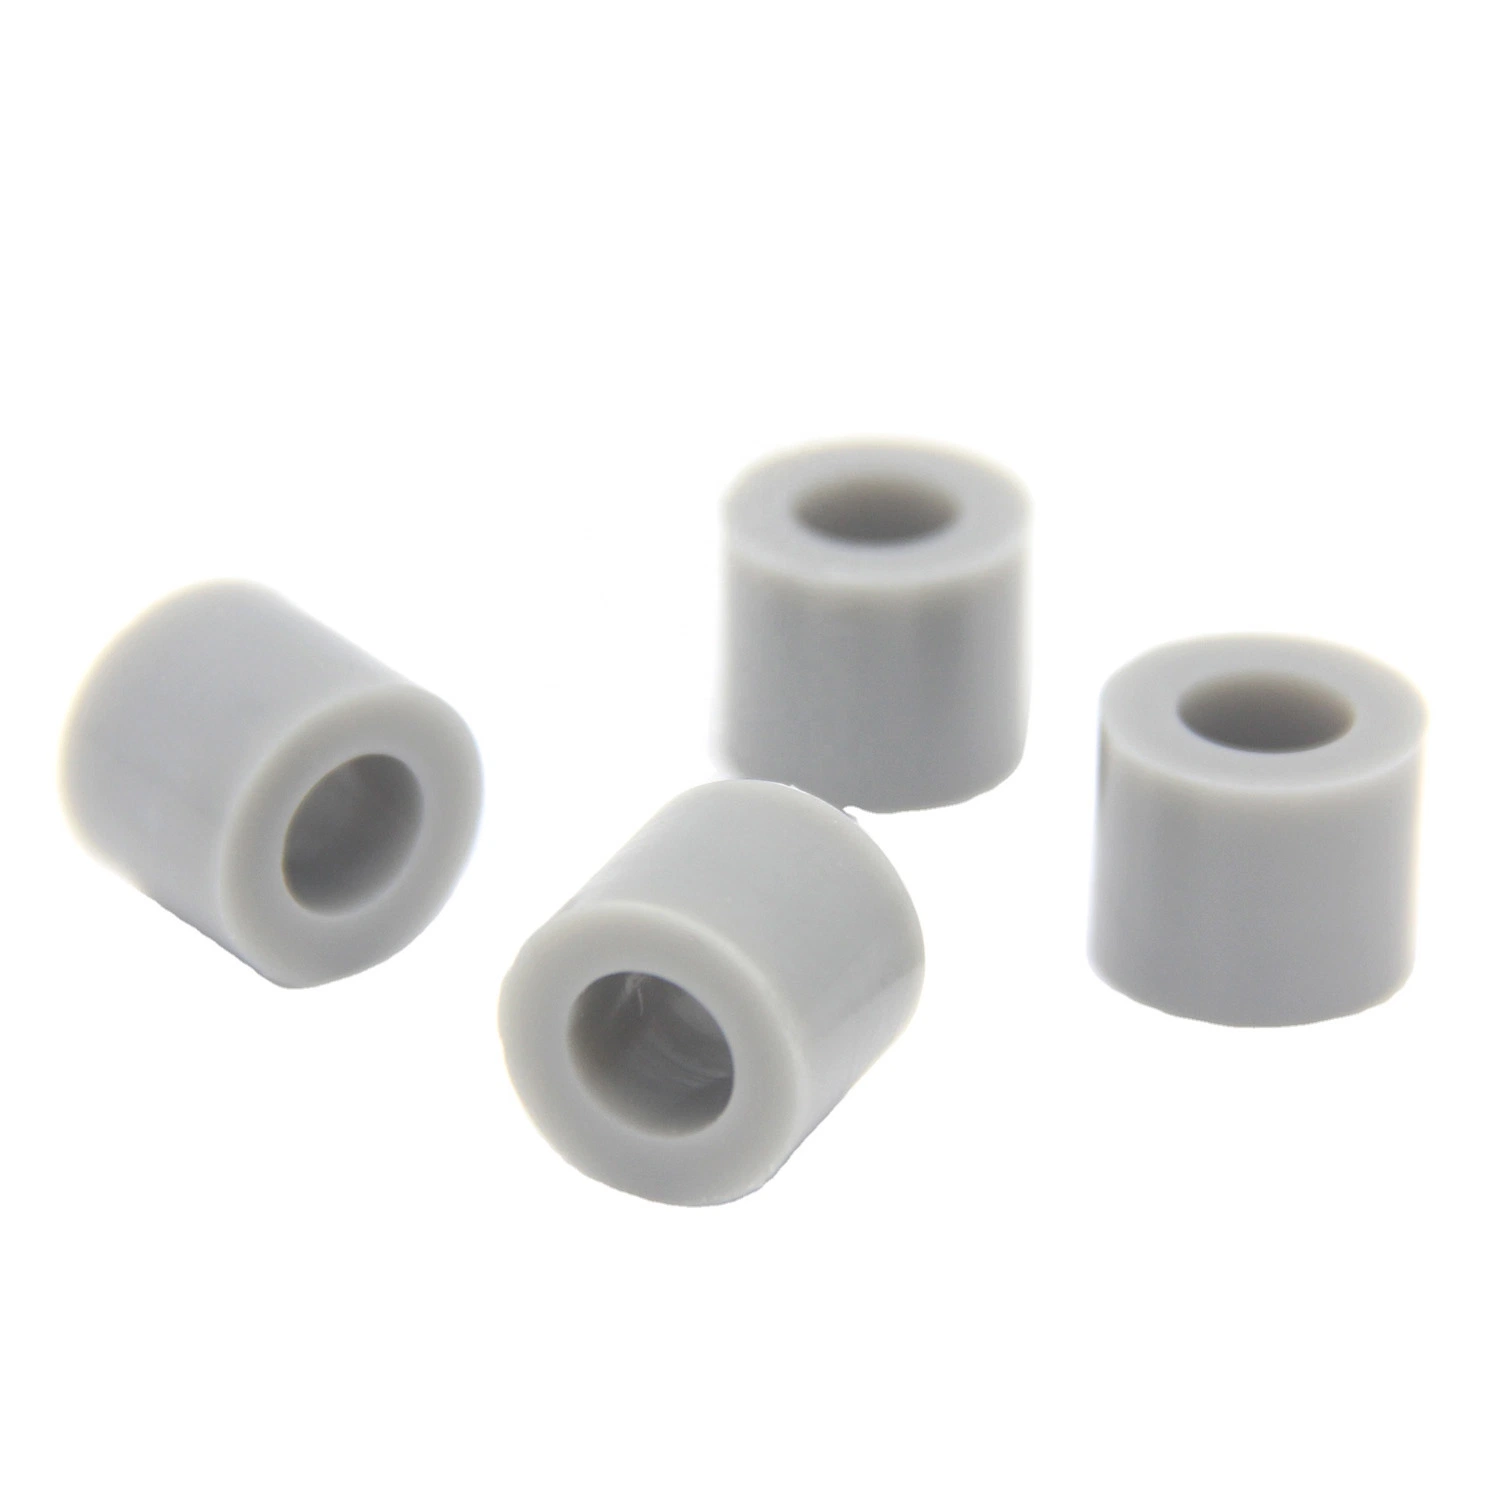 High quality/High cost performance  Silicone Rubber End Cap Tapered Stopper Plug with Good Price